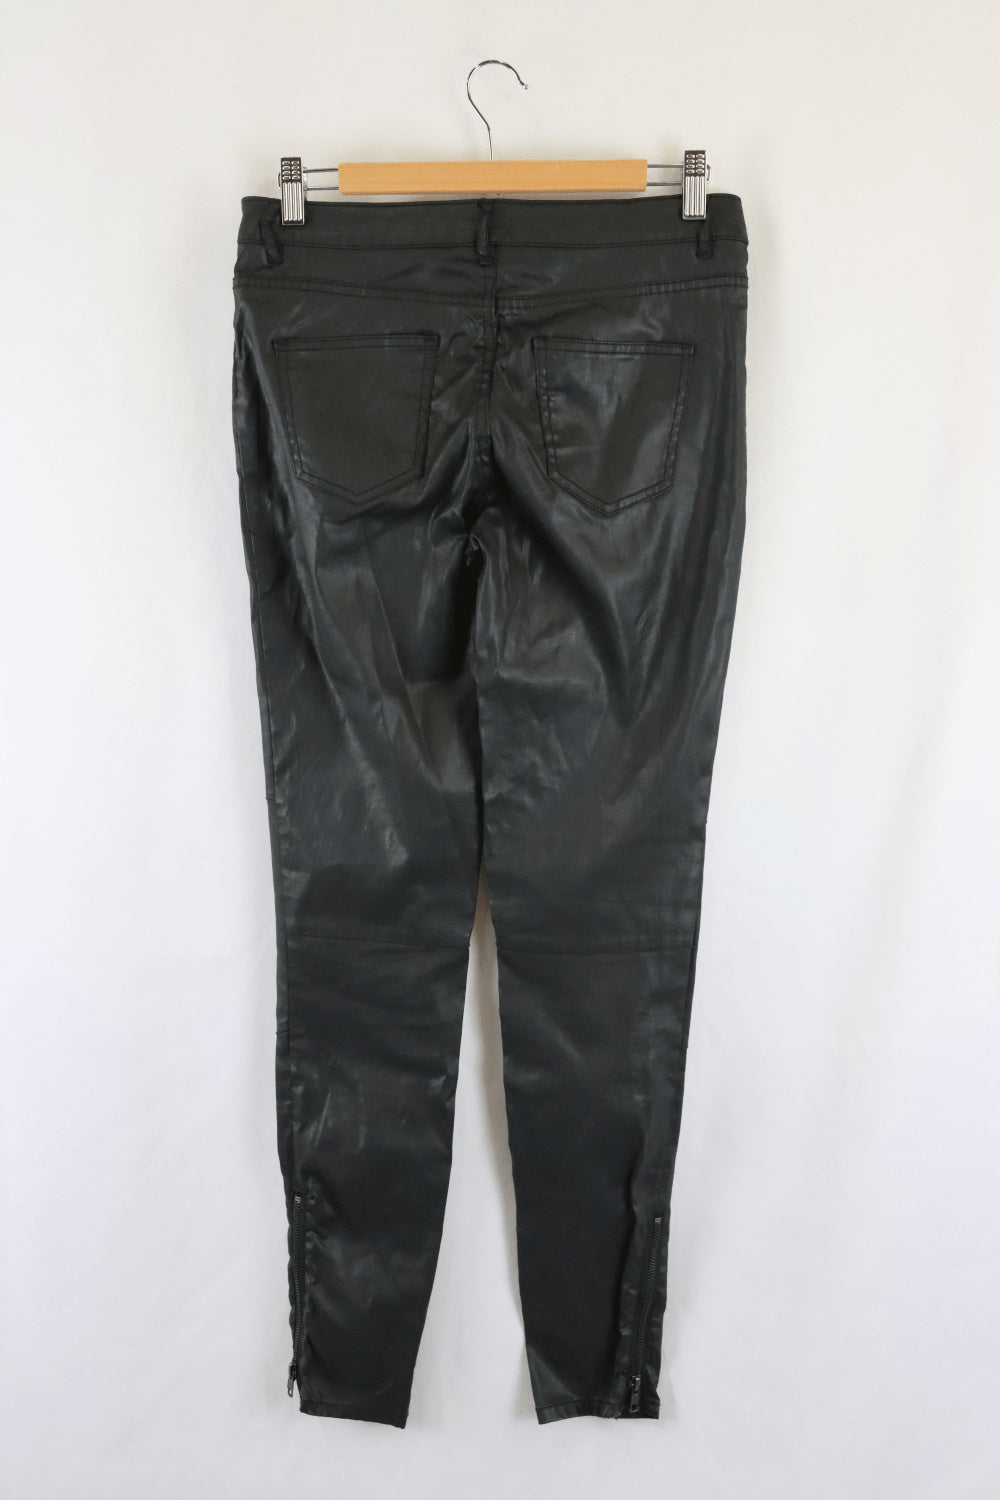 Country Road Black Jeans 6